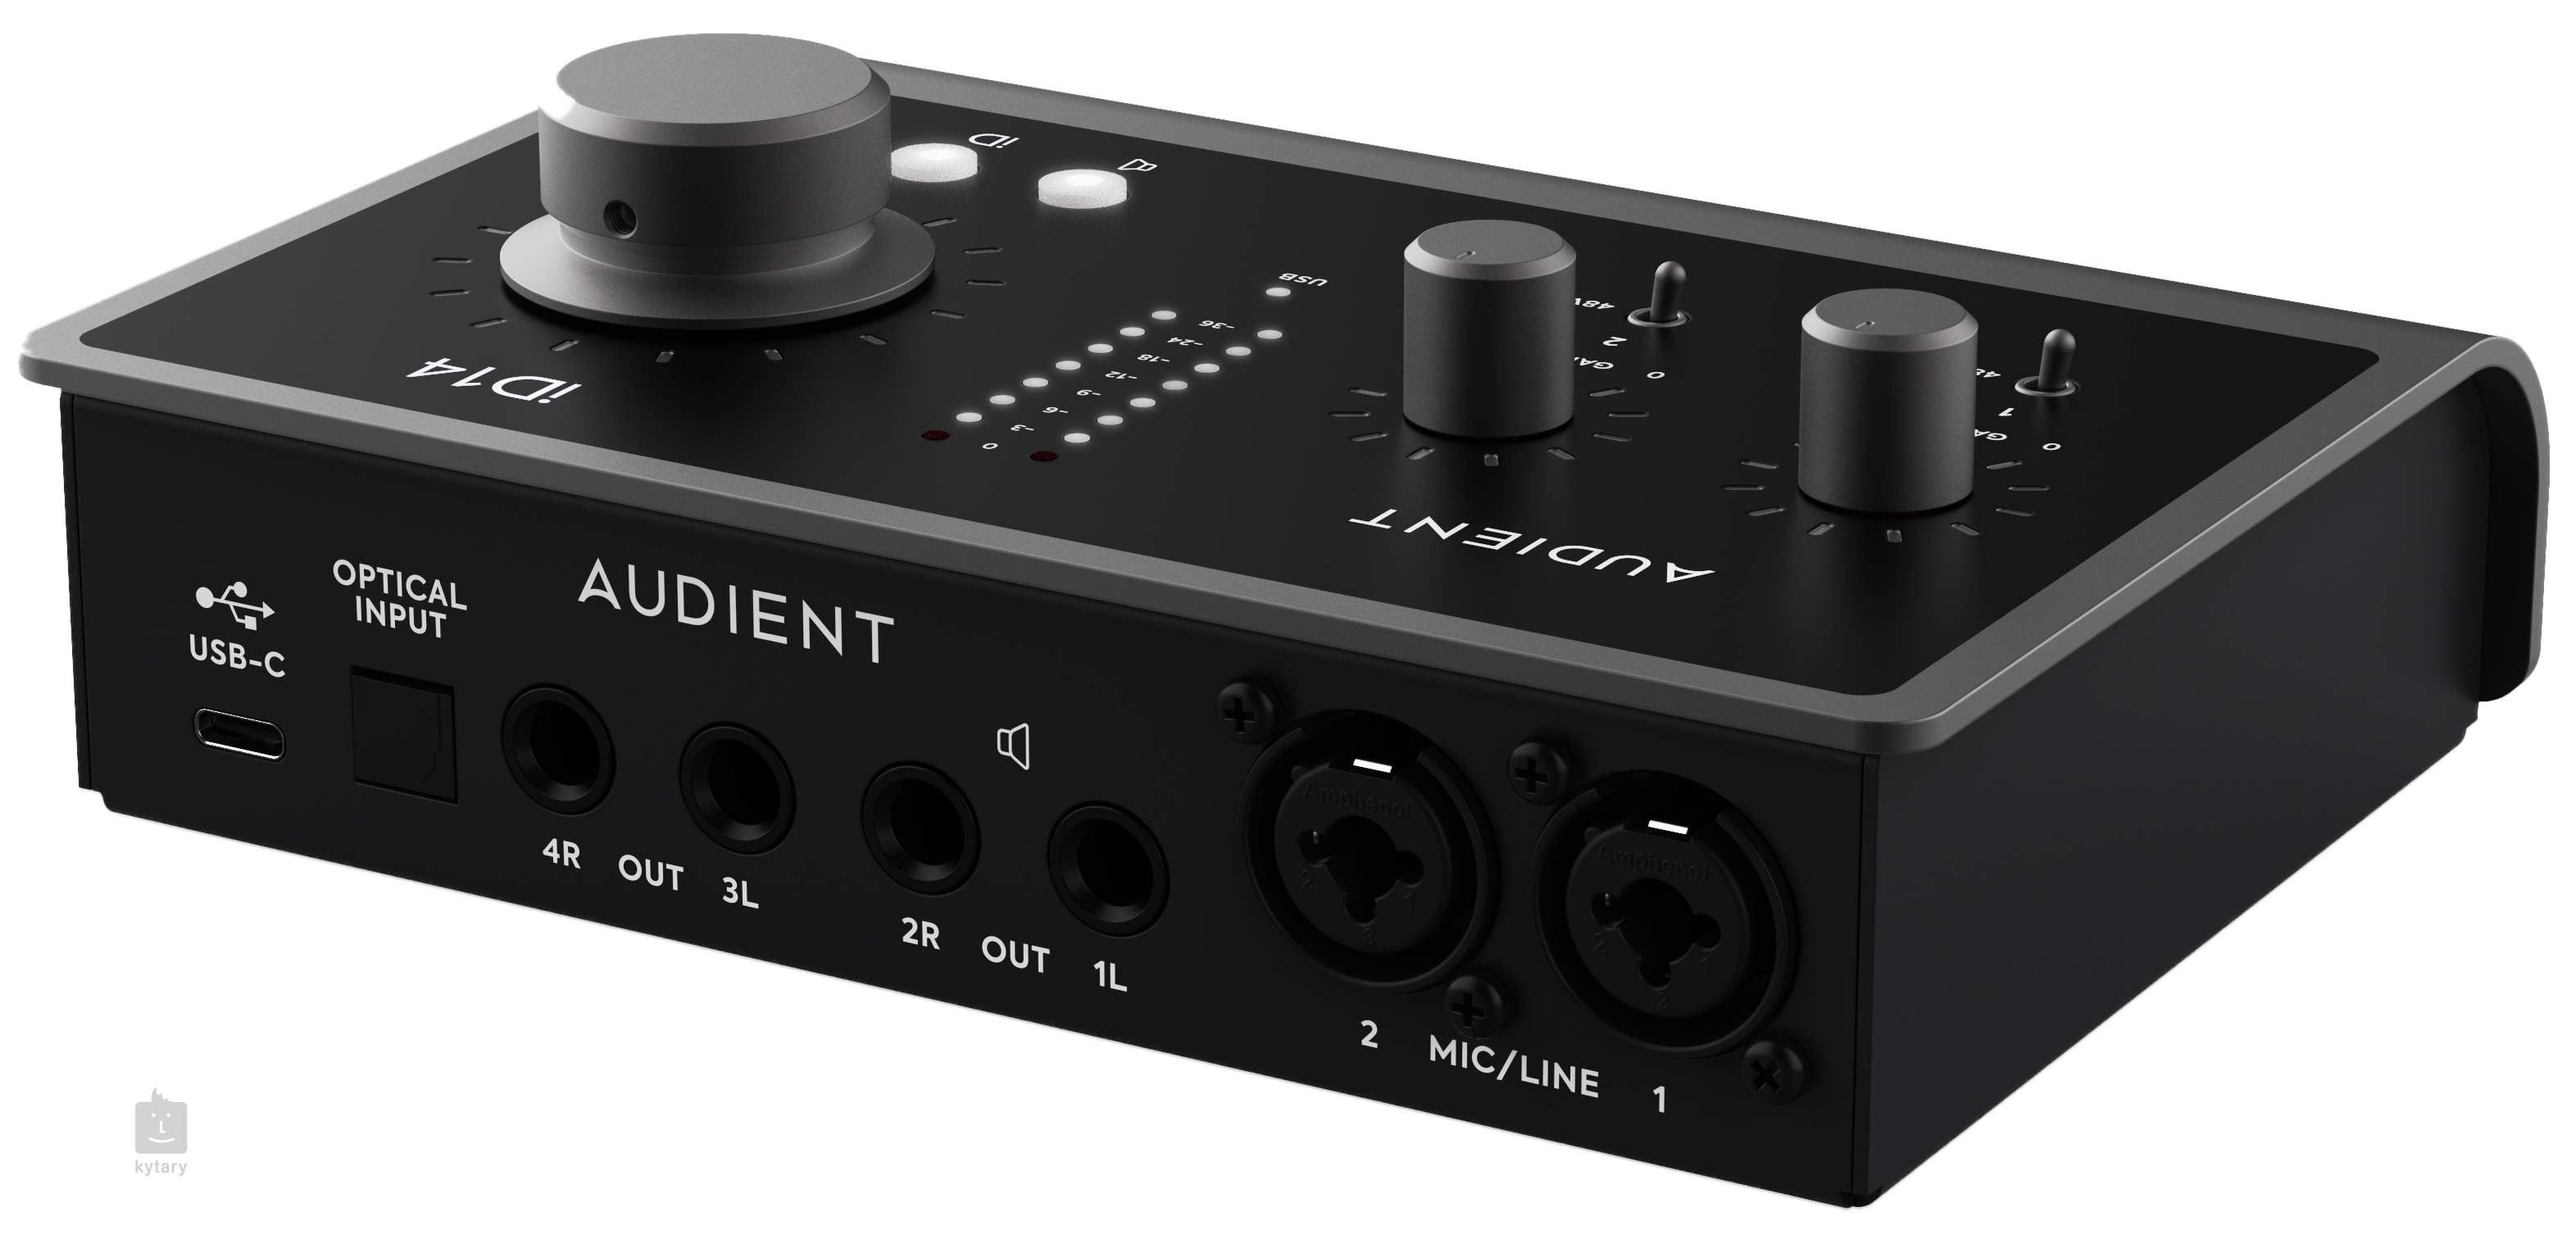 Audient id 14. Audient id14 MK II. Audient id14 mk2. Звуковая карта Audient id14 MKII. Audient id14 MKII Audient.